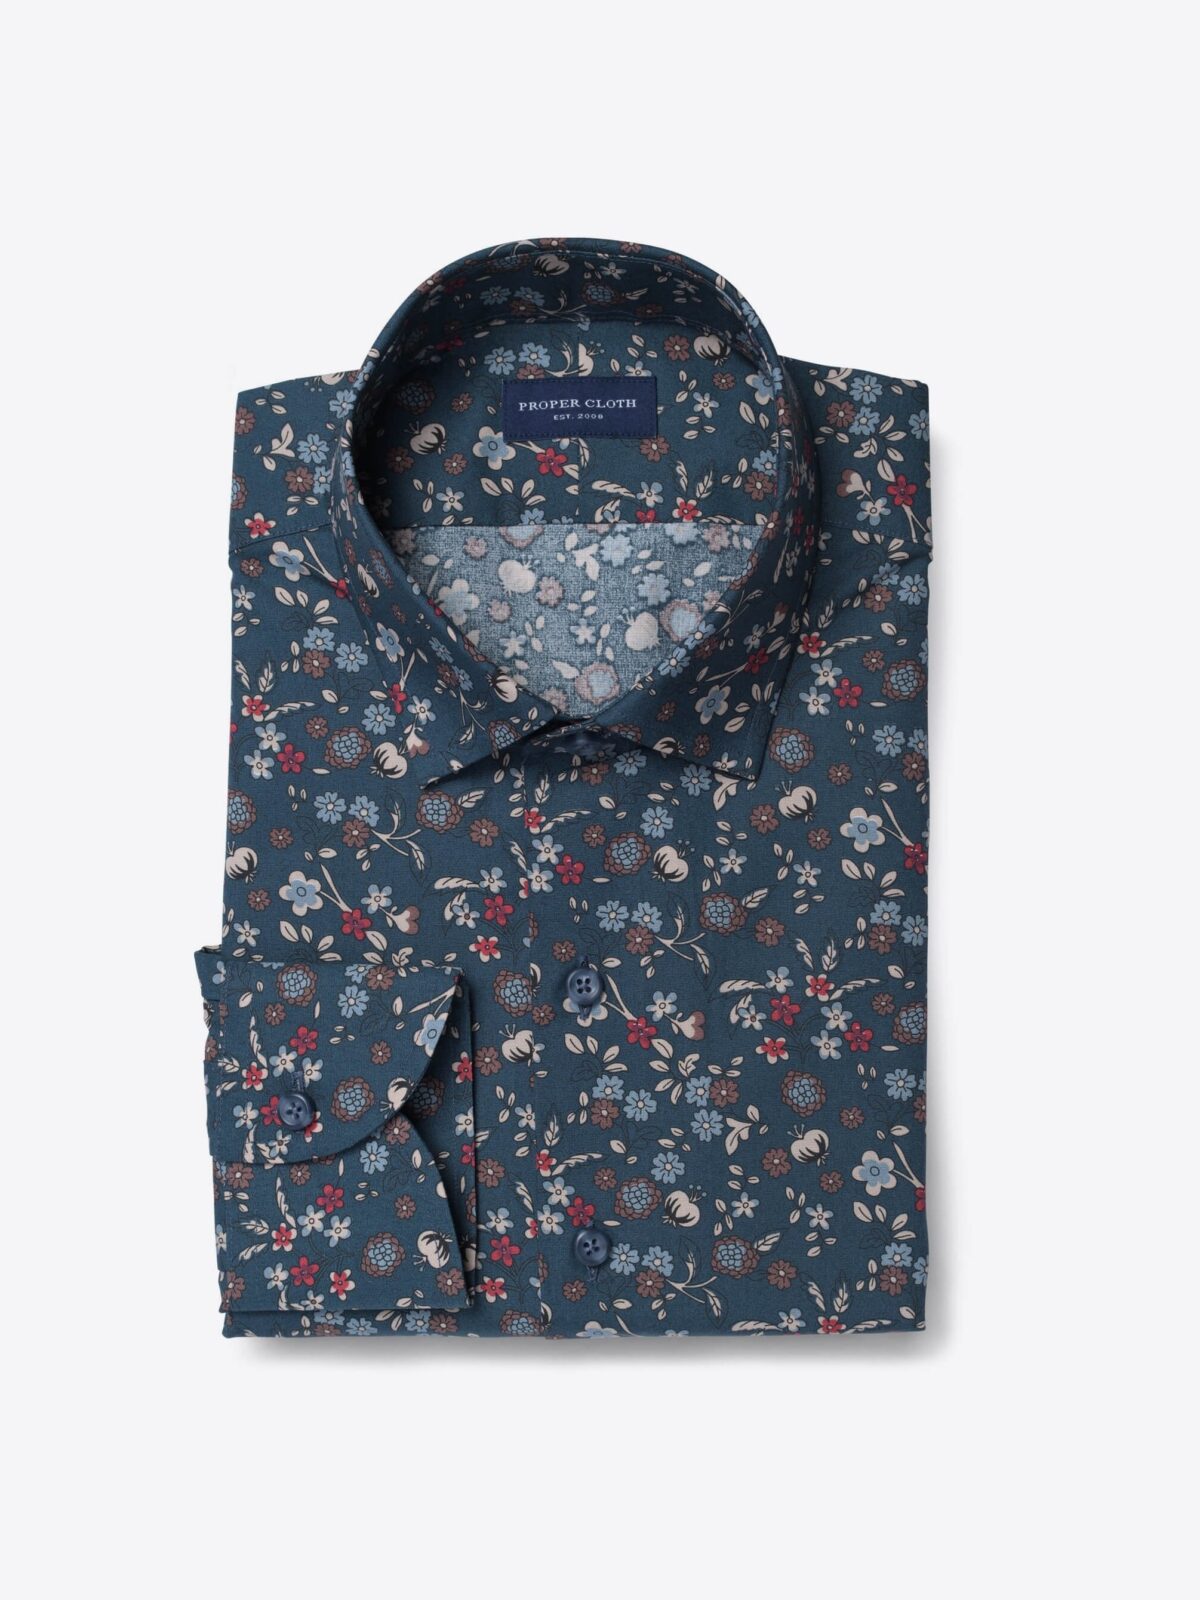 Consider the Floral Shirt This Spring